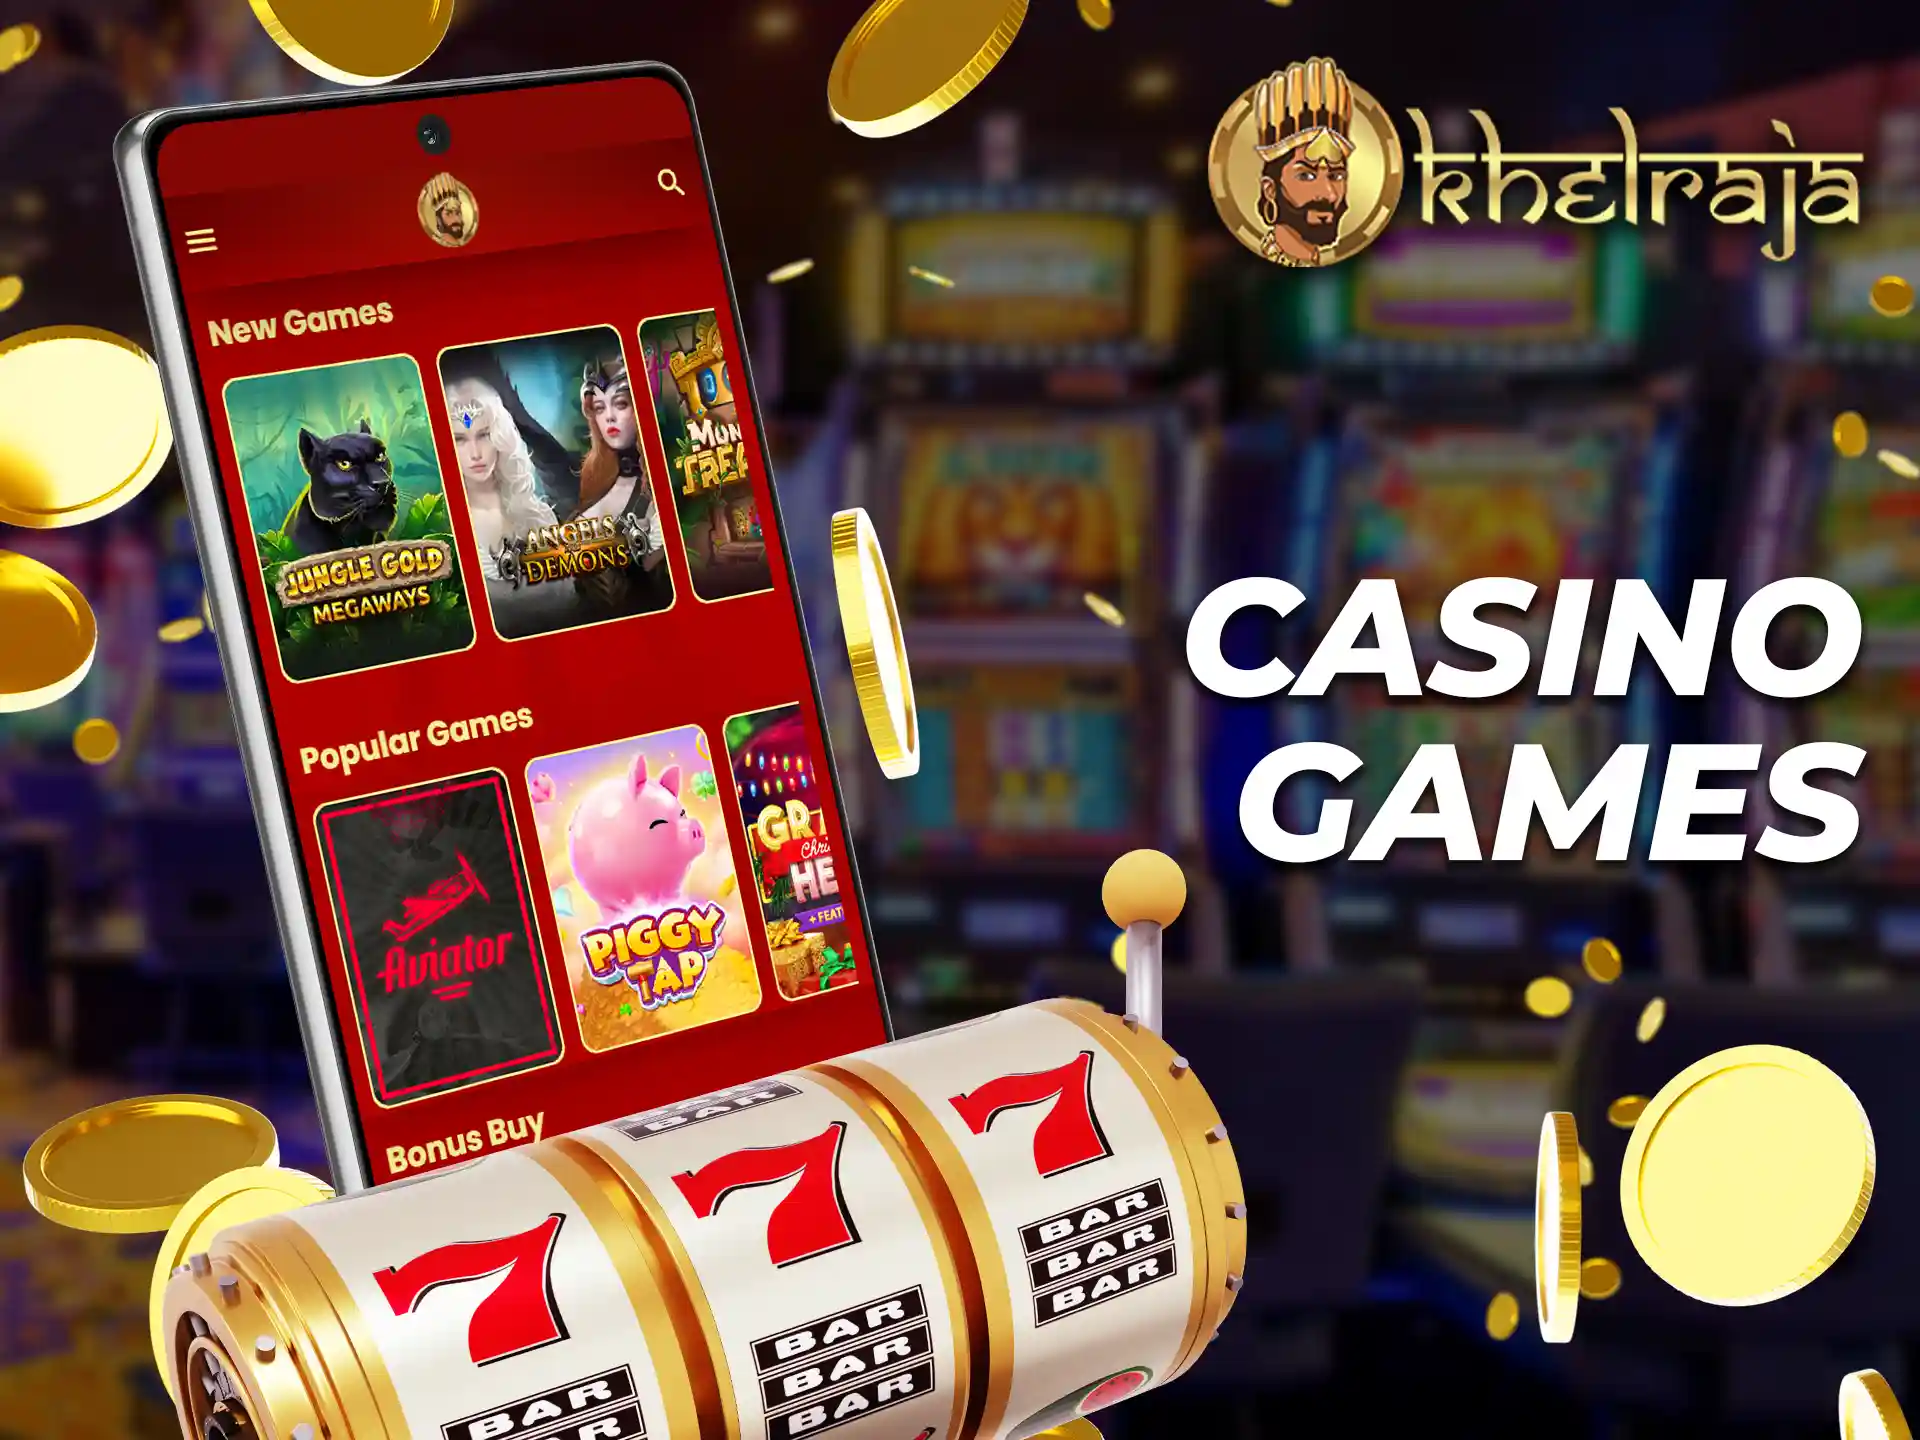 Hundreds of games and live casino games are available on the Khelraja app.